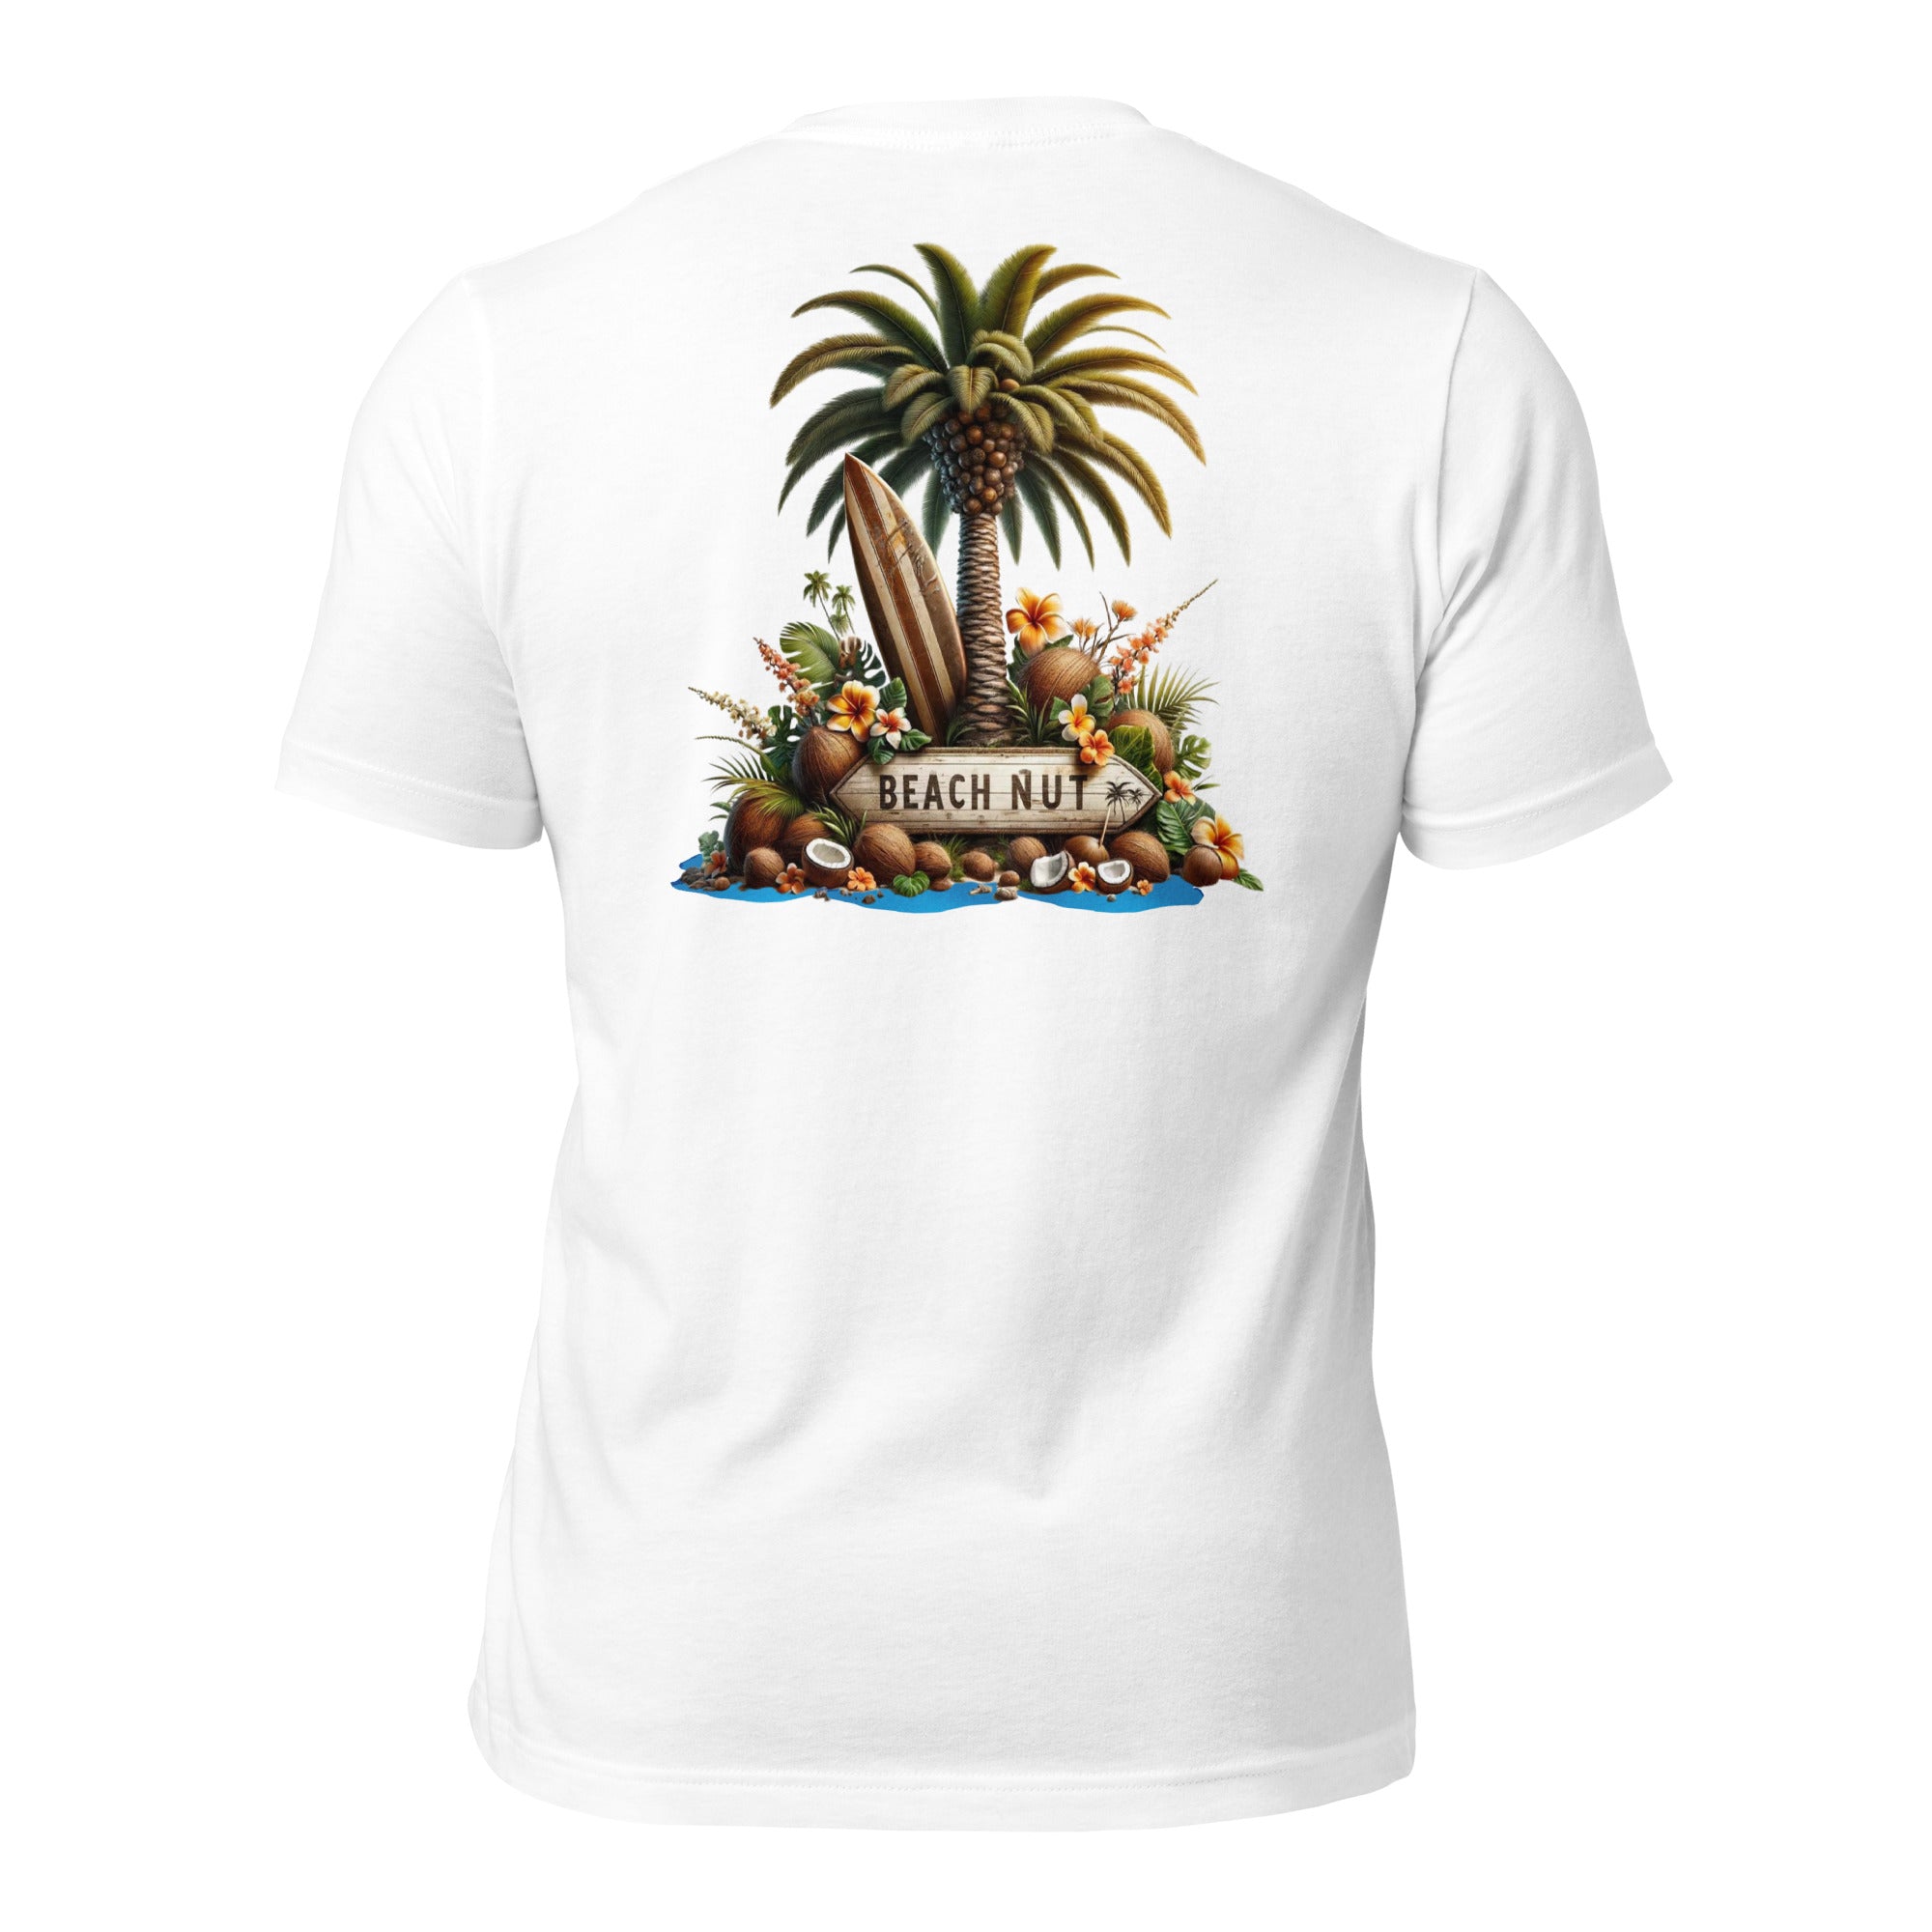 Carefree Spirit of the Tropics With Our Beach Nut T-Shirt by Lucas Islander.